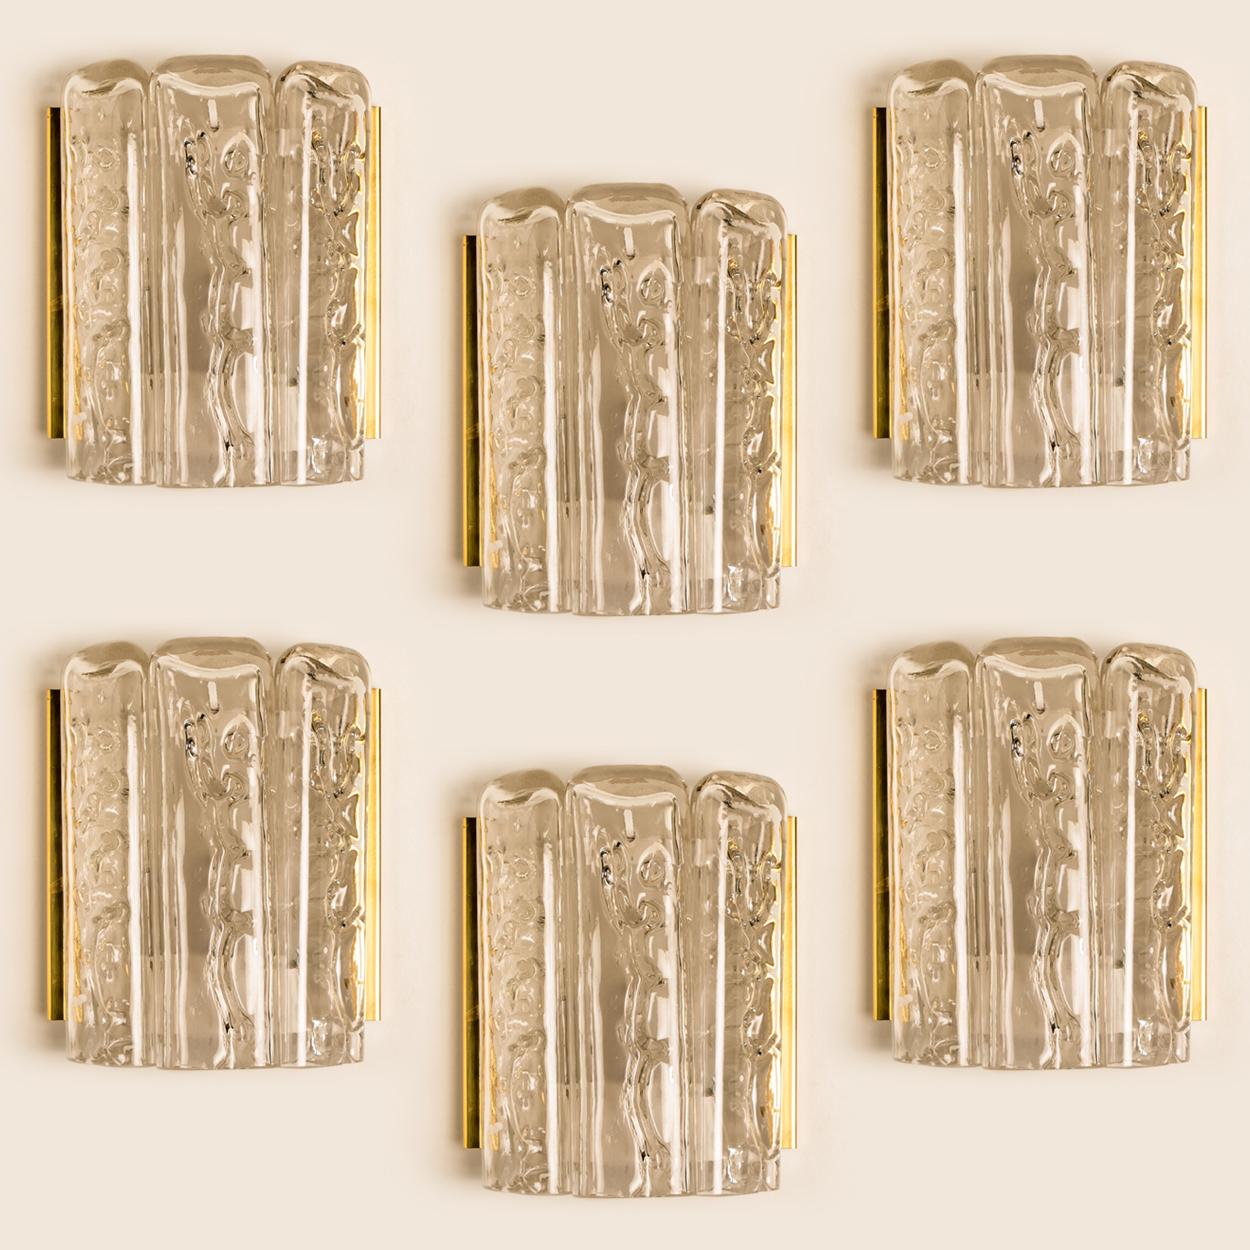 This set of blown wall sconces date from the 1960s and were created by the iconic firm of Doria Leuchten in Germany. They are fabricated with a backplate in white and brass and with two molten-glass, flat tubular prisms. High-end pieces

Measures: